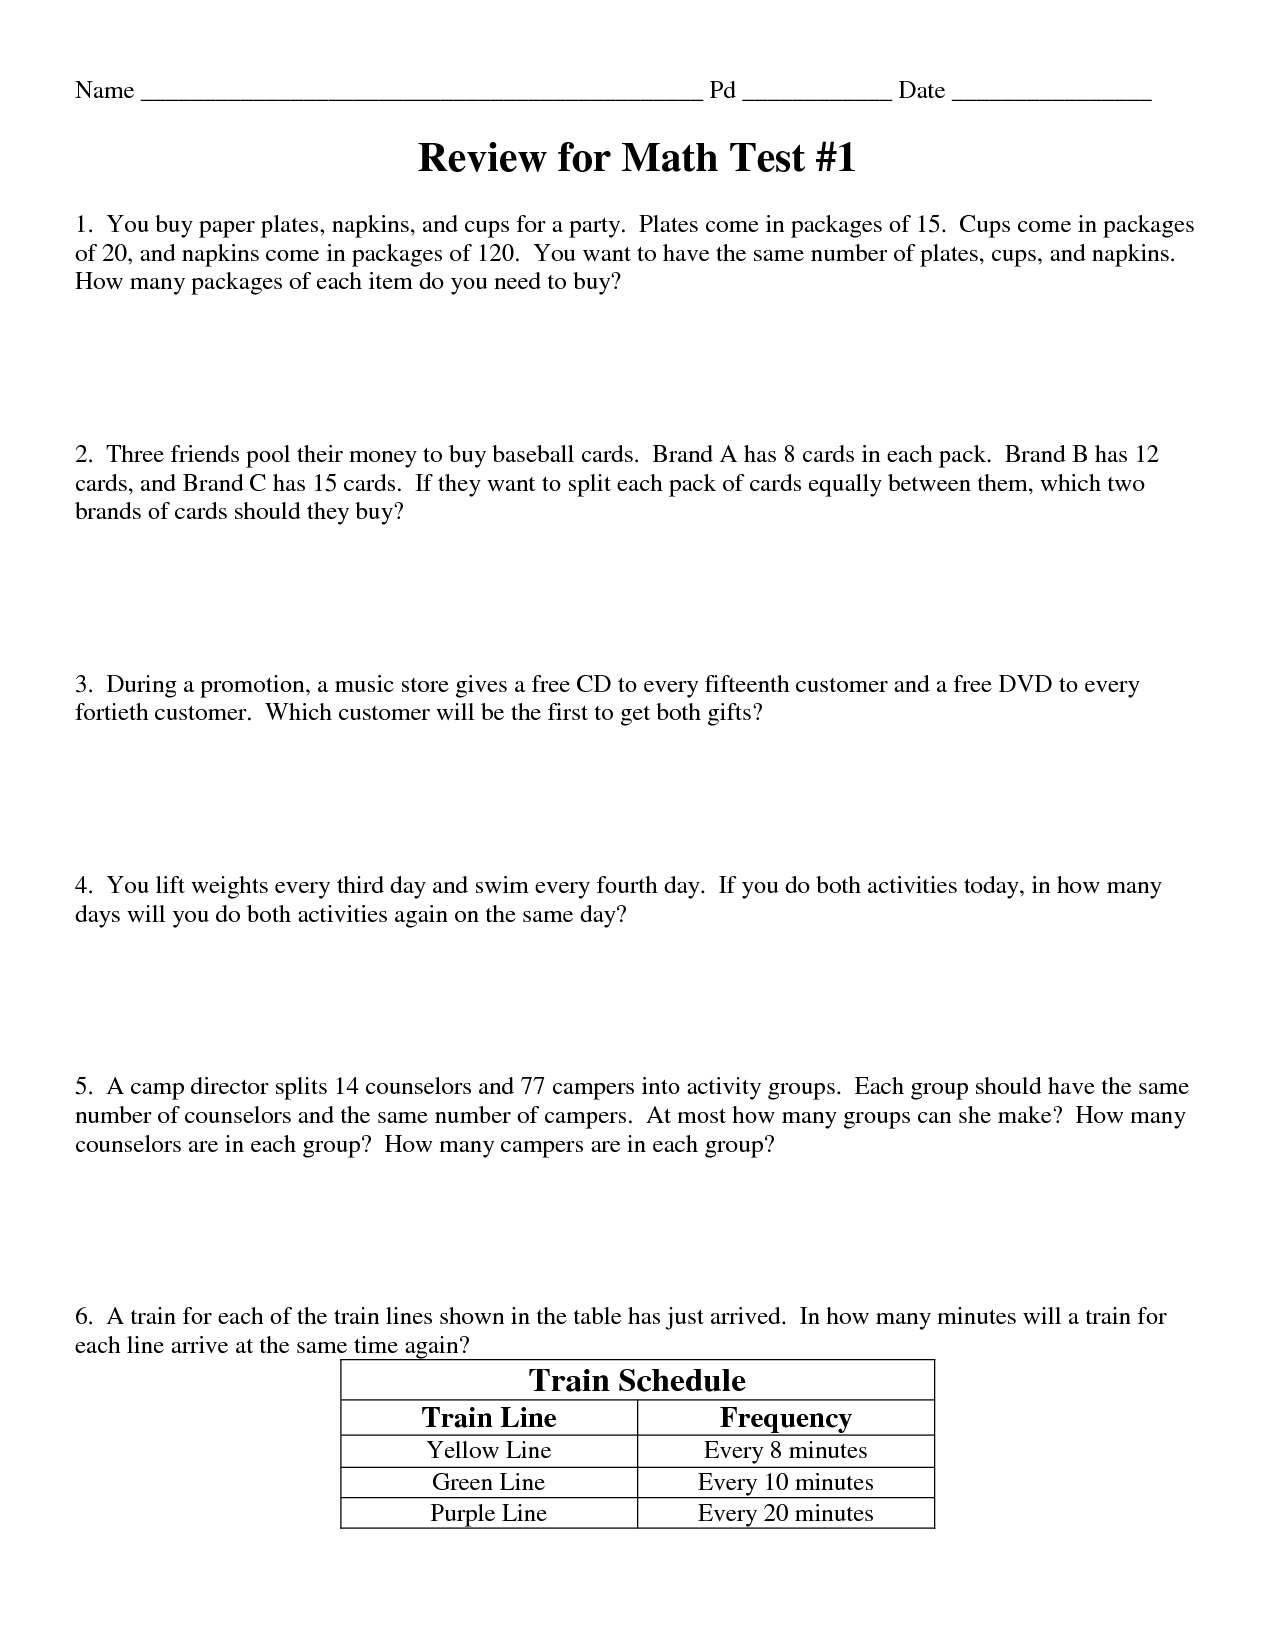 13-best-images-of-greatest-common-multiple-worksheet-least-common-multiple-word-problems